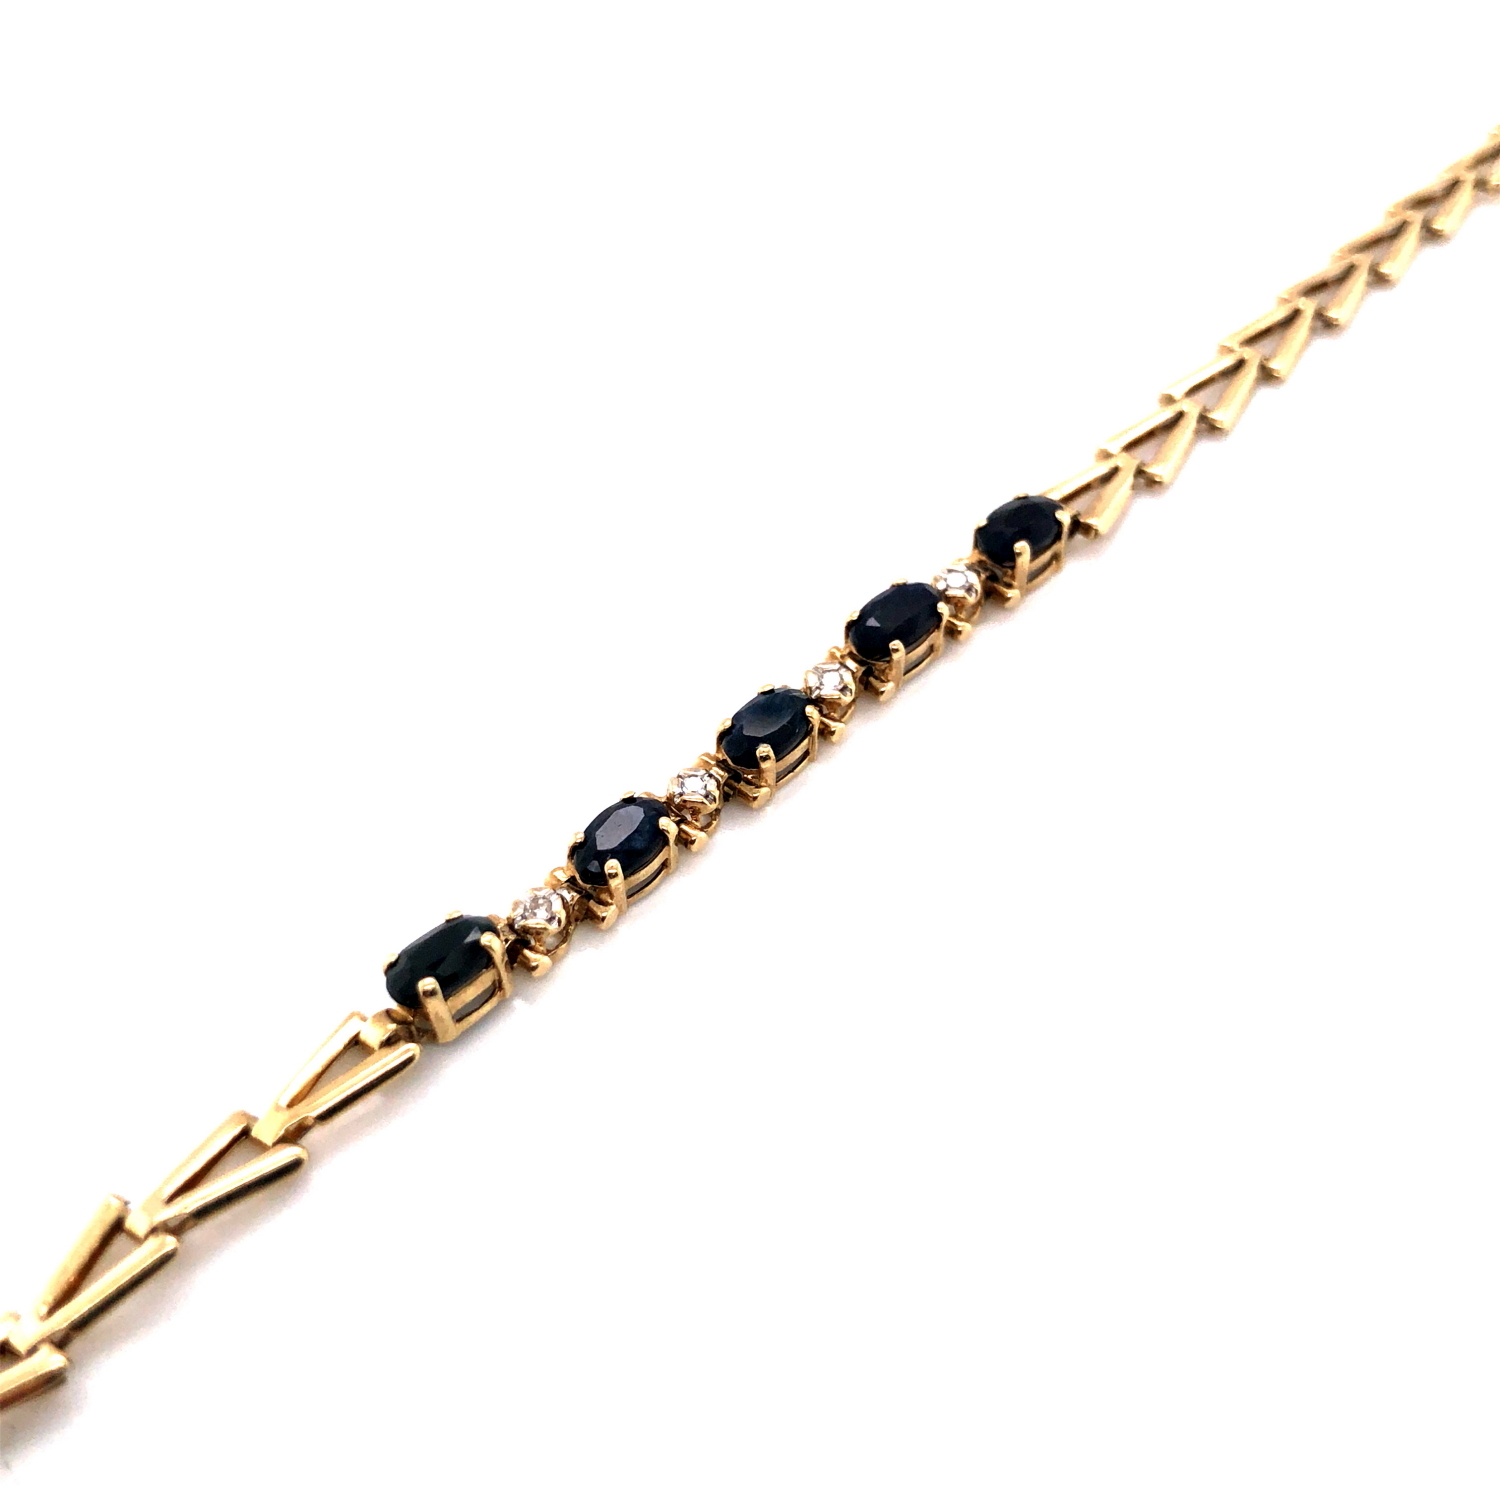 A HALLMARKED 9ct YELLOW GOLD SAPPHIRE AND CUBIC ZIRCONIA LINE BRACELET. FIVE OVAL SAPPHIRES IN A - Image 3 of 3